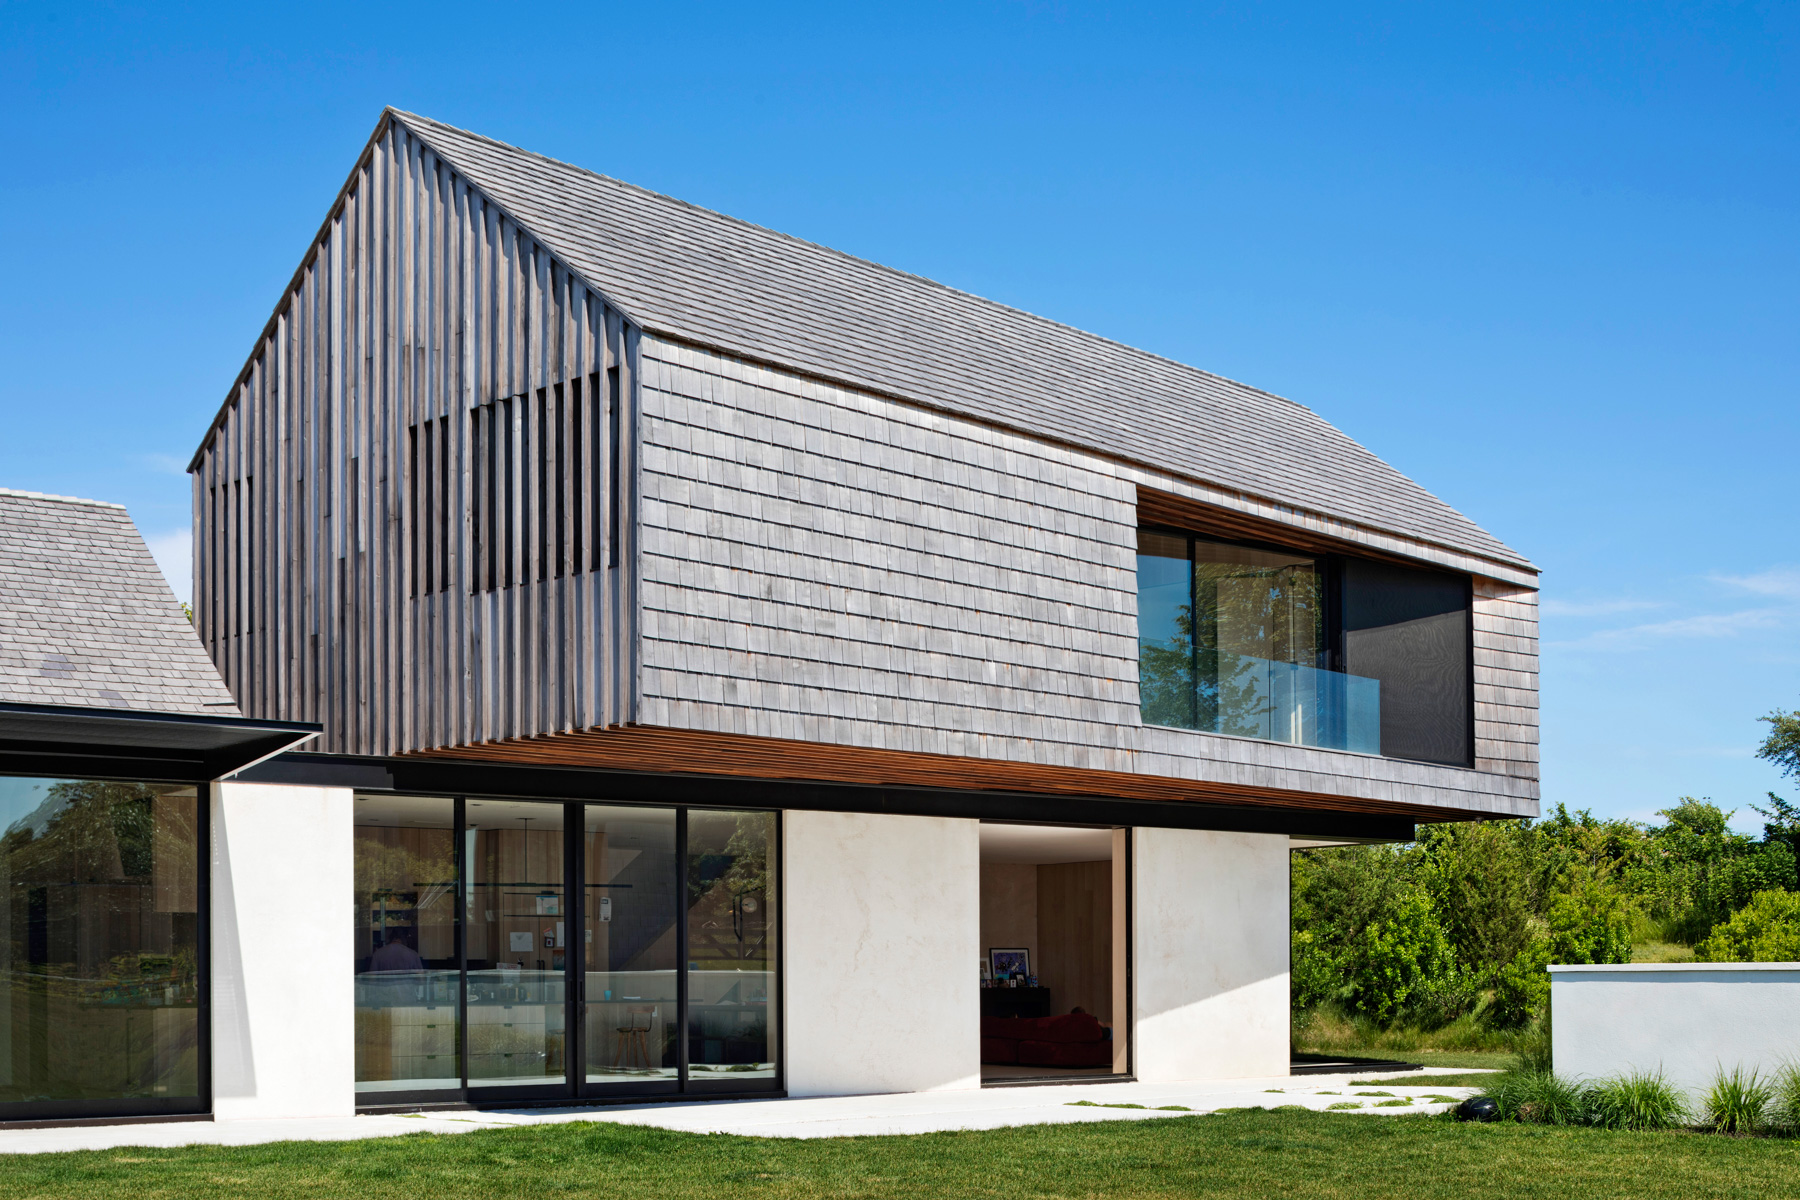 Residential cantilevered second-story gabled form